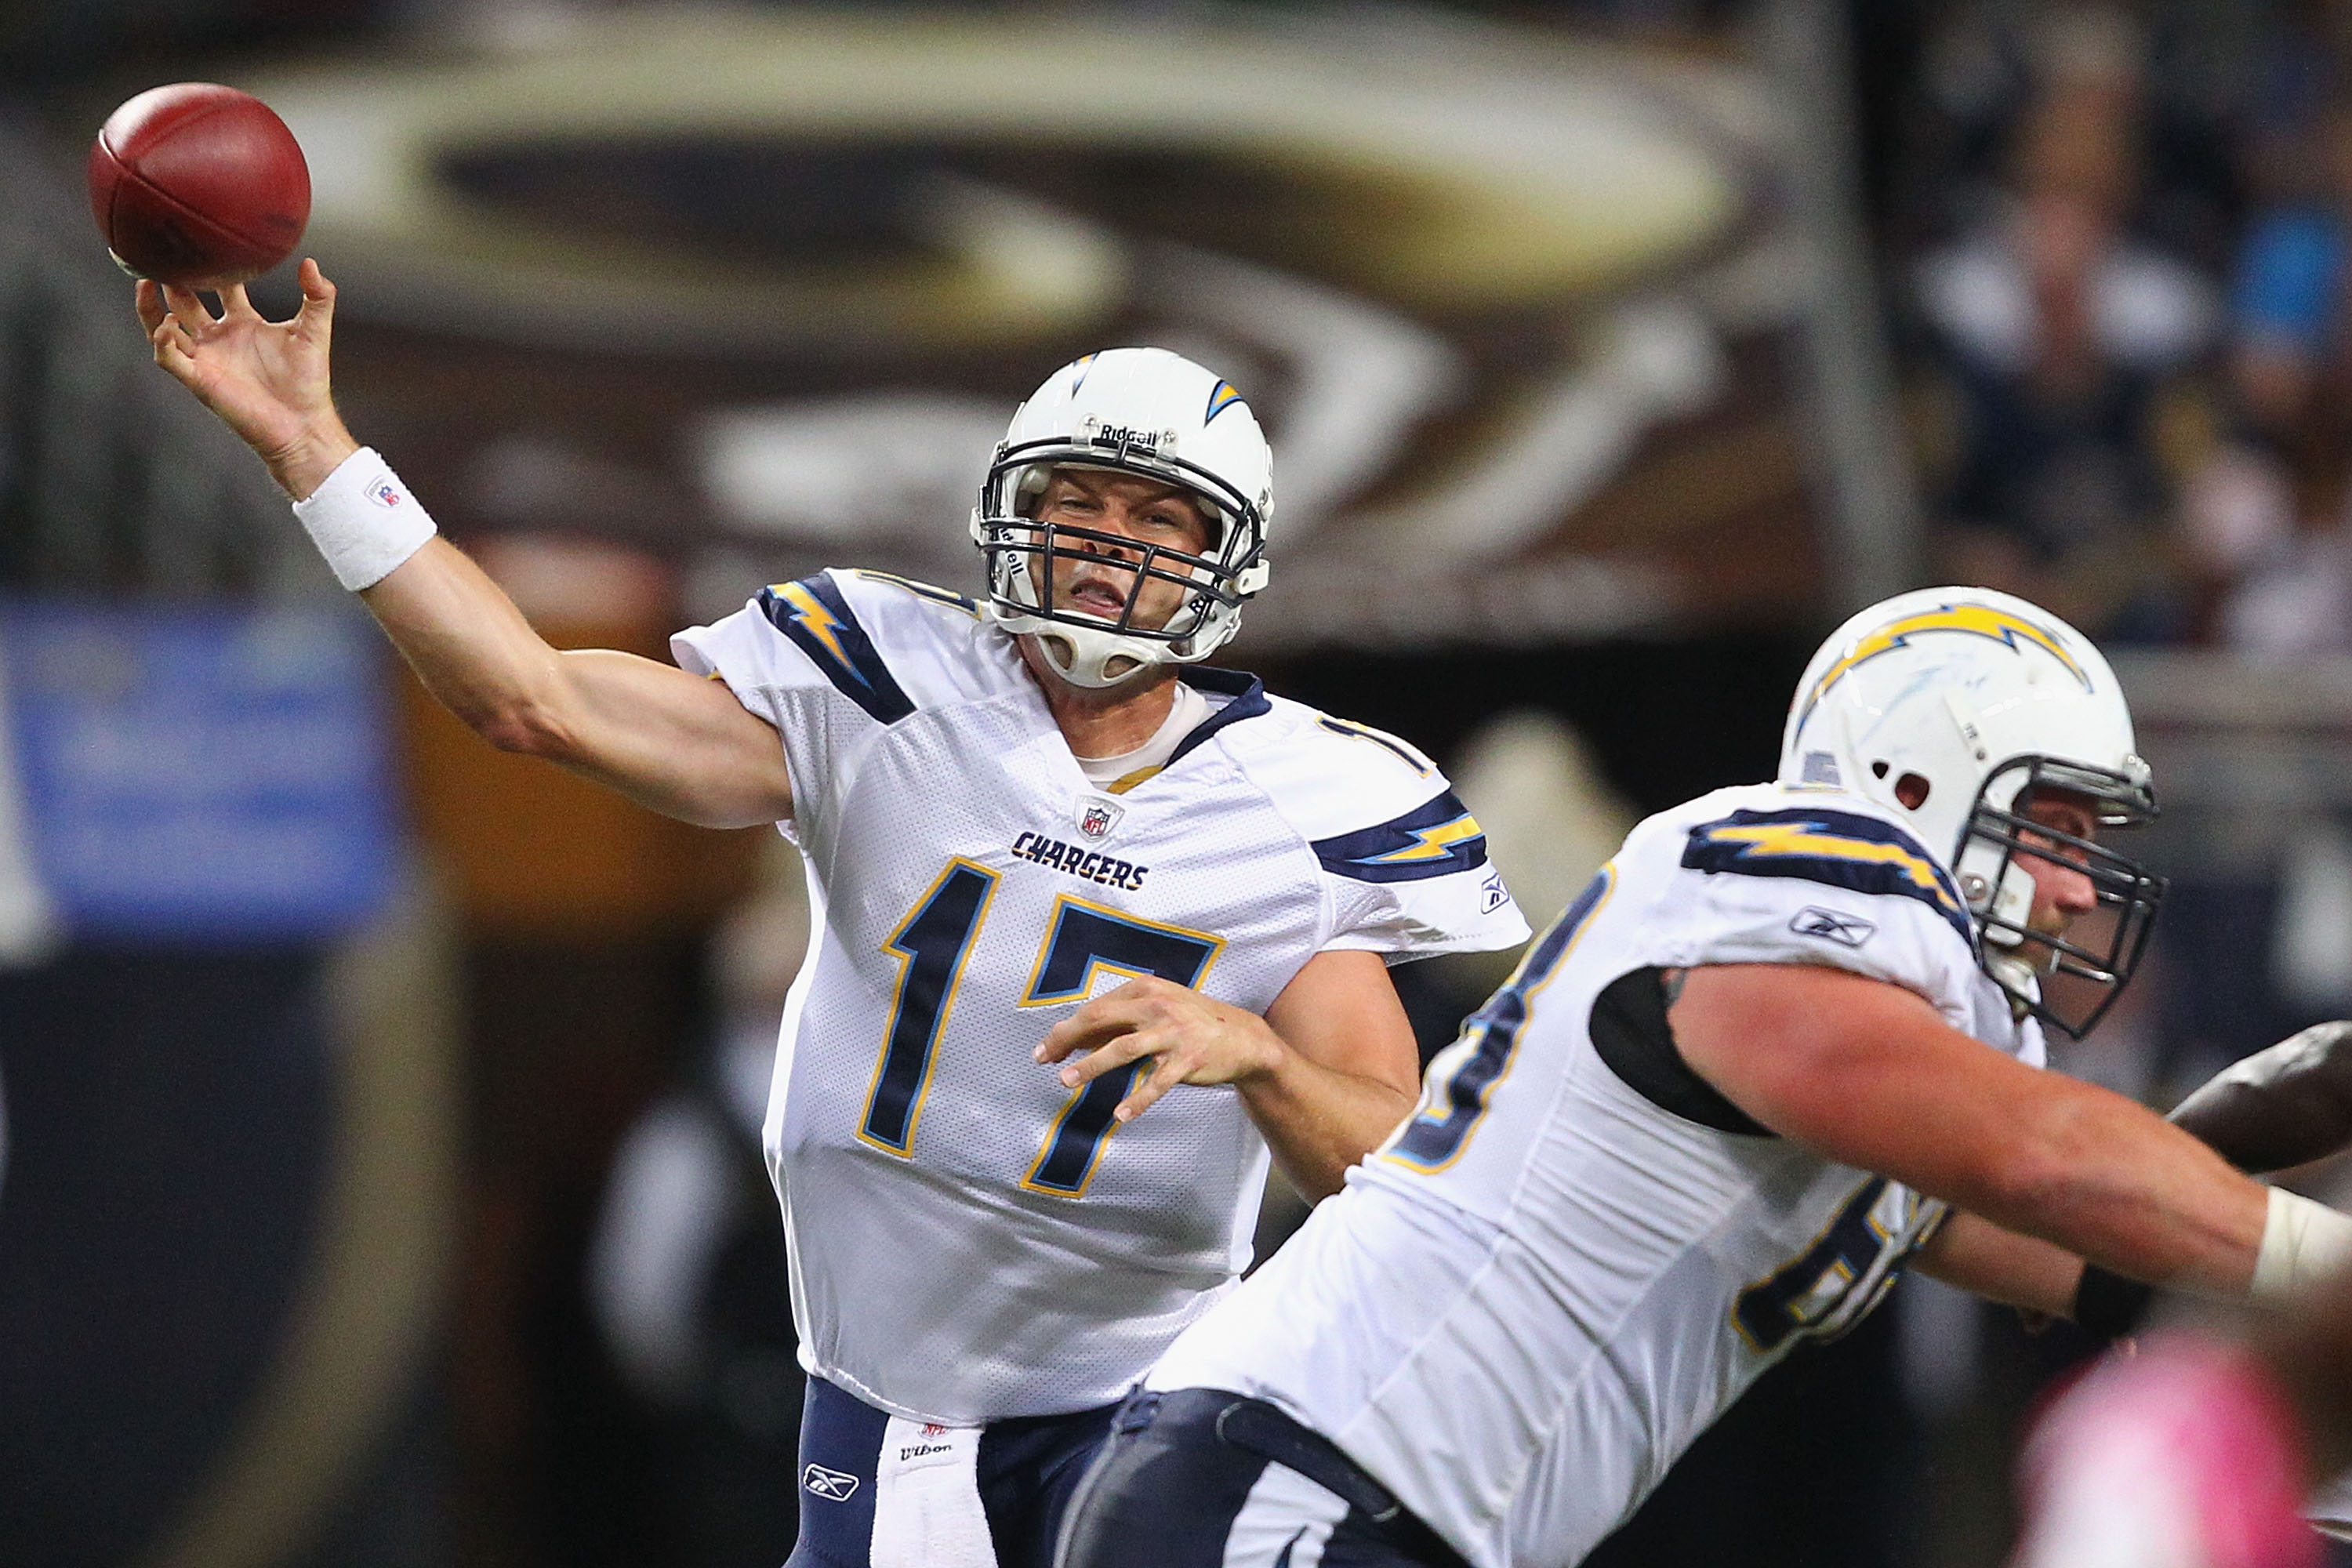 ST. LOUIS - OCTOBER 17: Philip Rivers #17 of the San Diego Chargers passes against the St. Louis Rams at the Edward Jones Dome on October 17, 2010 in St. Louis, Missouri.  The Rams beat the Chargers 20-17.  (Photo by Dilip Vishwanat/Getty Images)